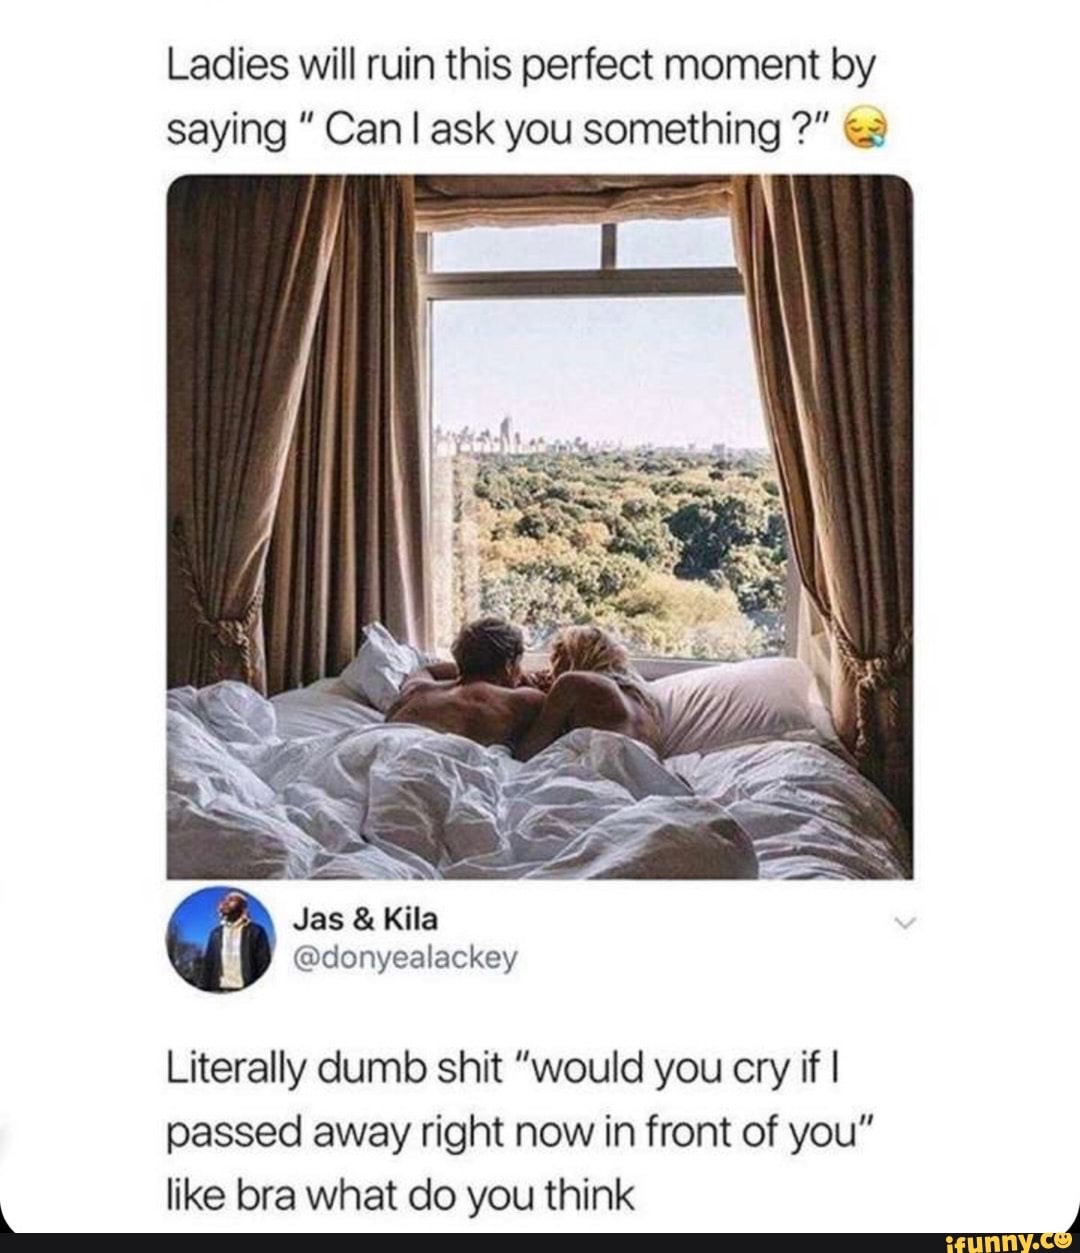 ladies will ruin this perfect moment - Ladies will ruin this perfect moment by saying " Can I ask you something?" Jas & Kila Literally dumb shit "would you cry if I passed away right now in front of you" bra what do you think ifunny.co